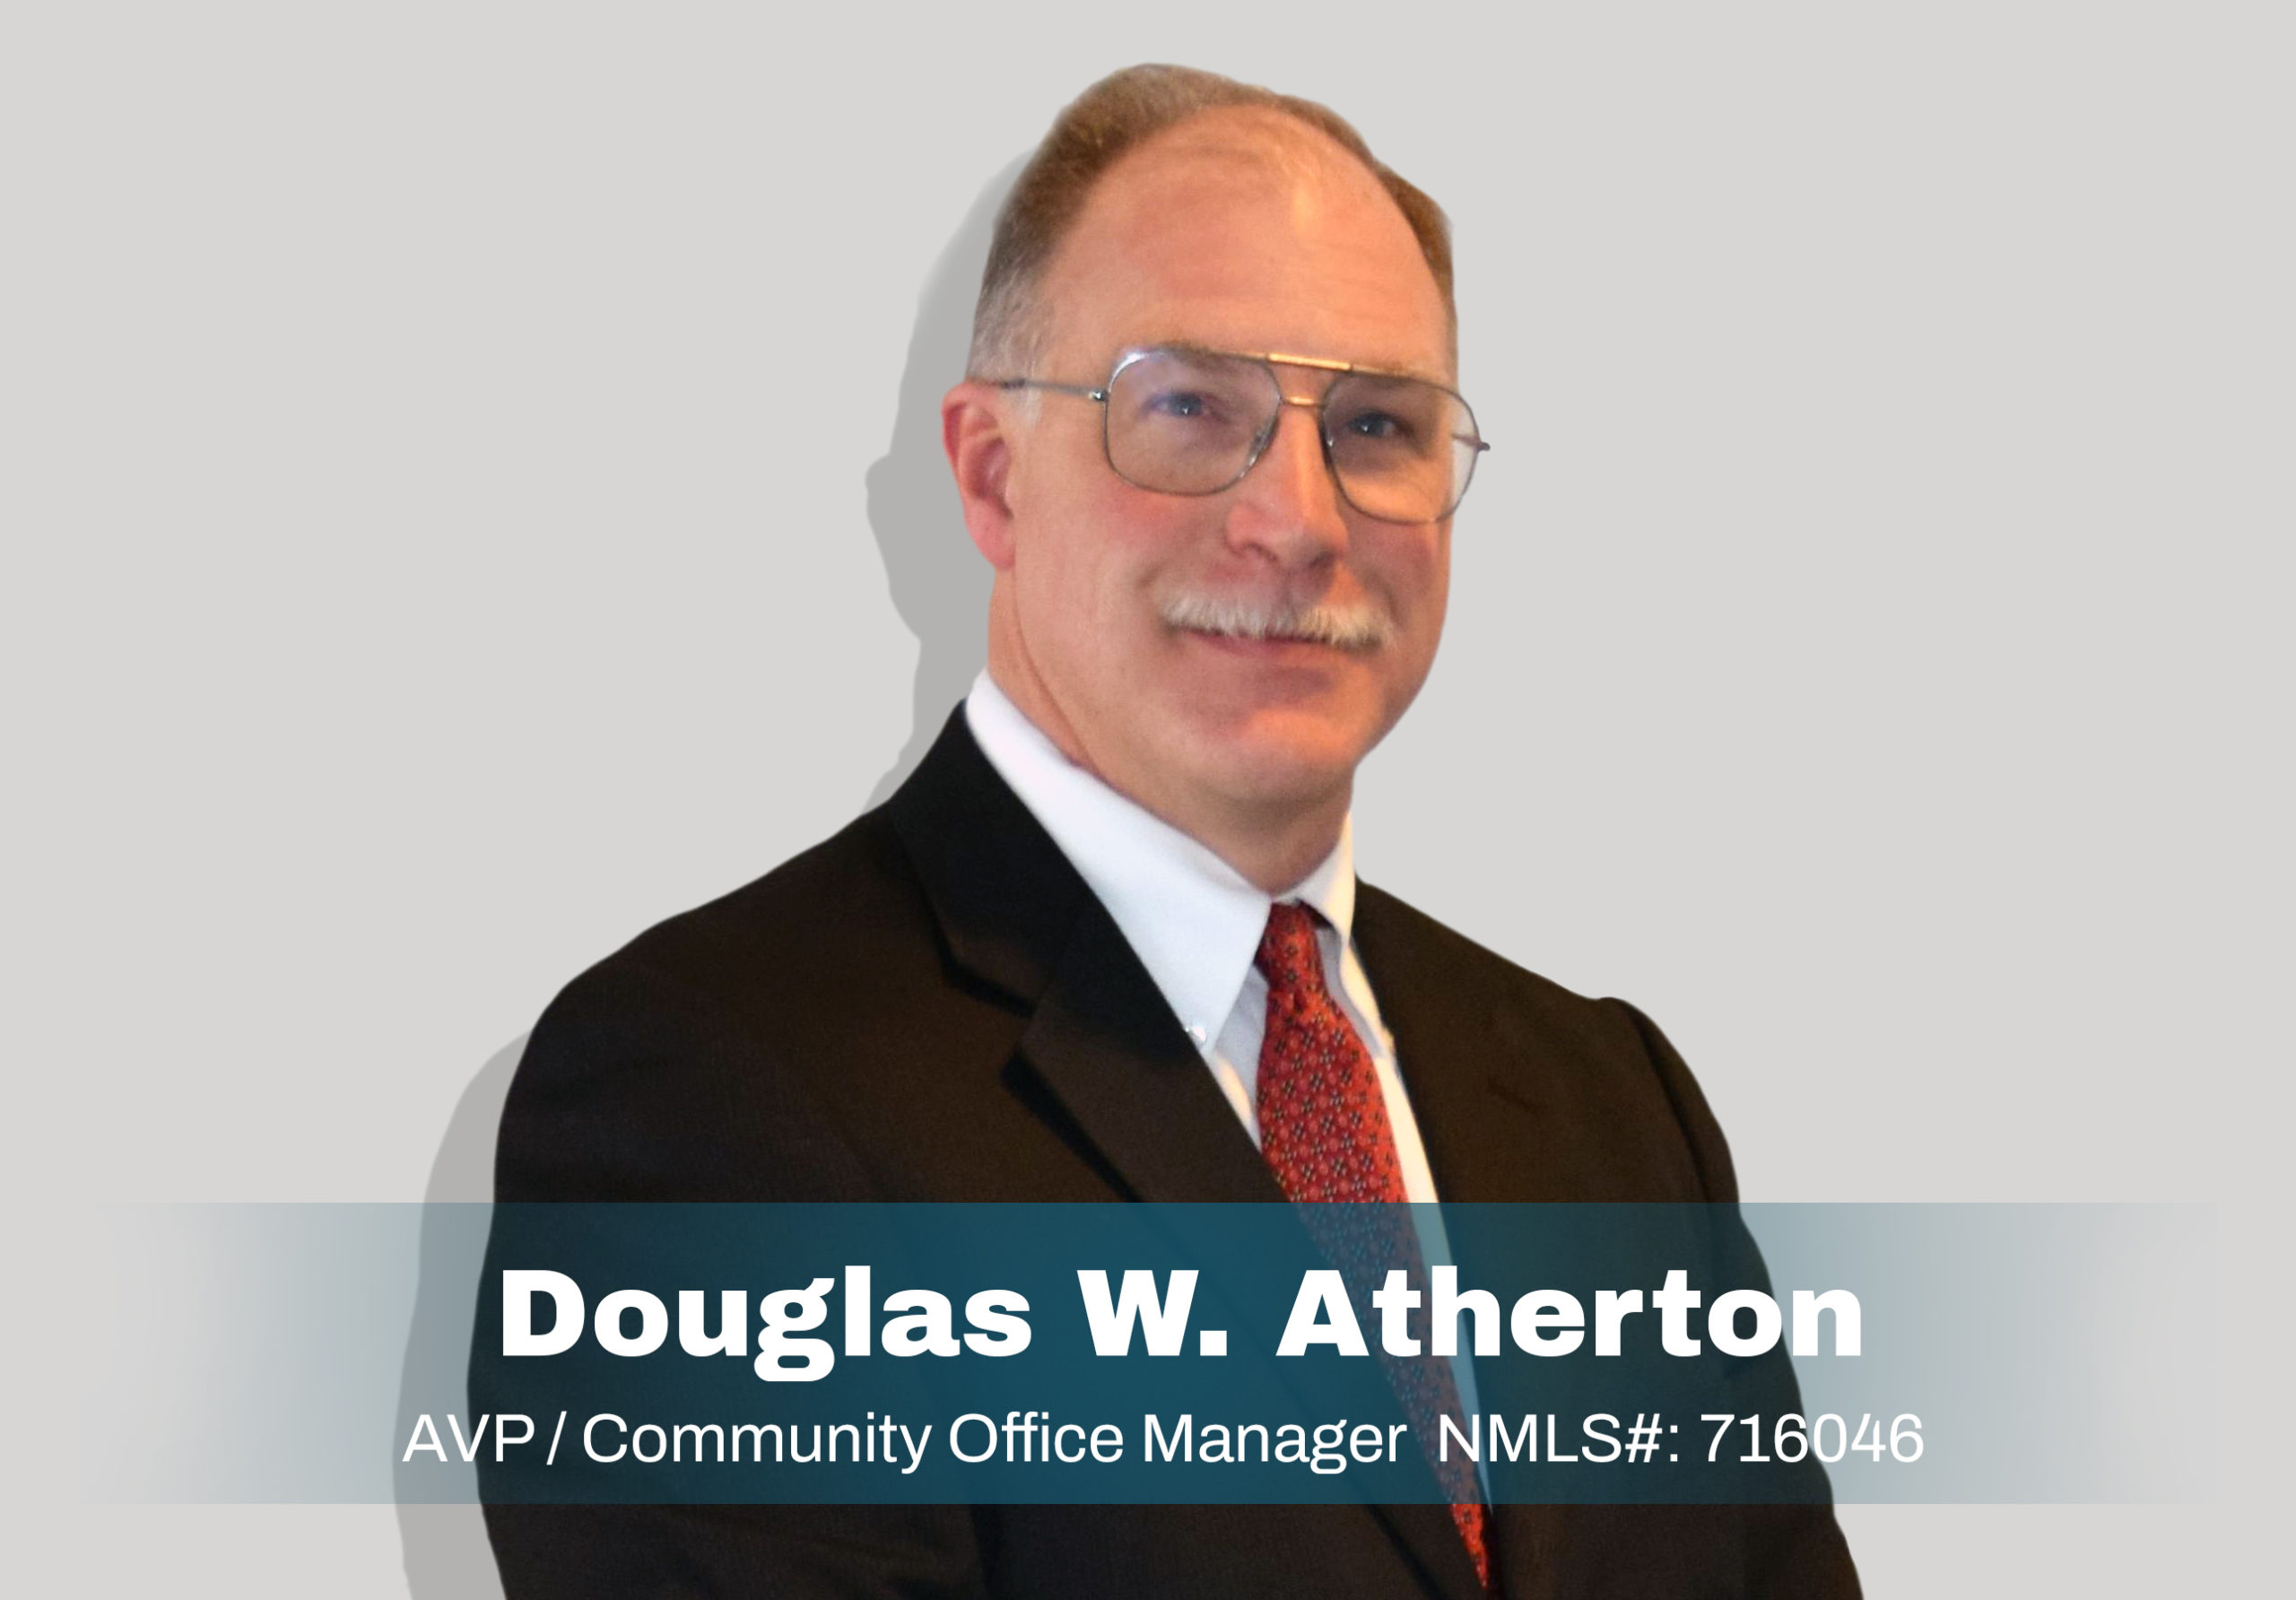 Douglas W. Atherton - Assistant Vice President - Effort Community Office Manager - NMLS#: 716046